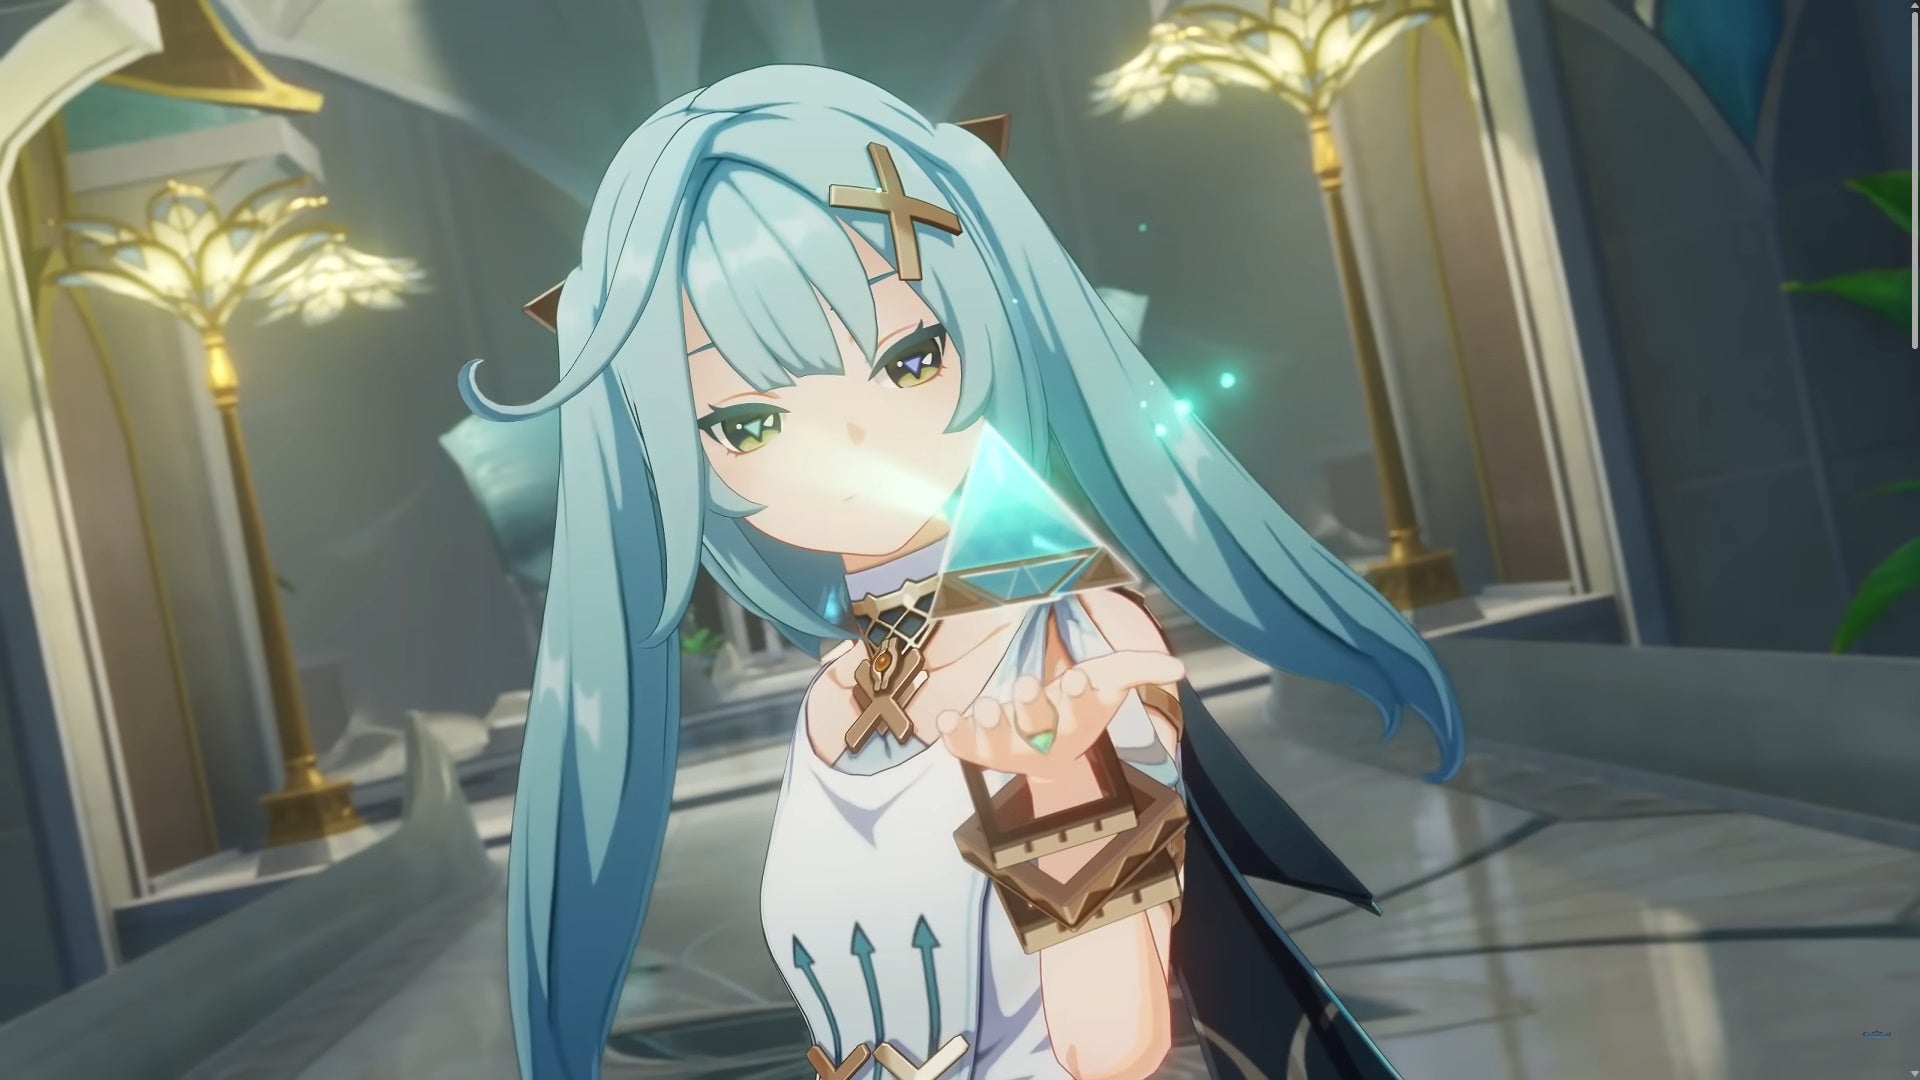 Genshin Faruzan teams: An anime girl in a white dress and with blue pigtails holds a glowing green triangular device in her hand